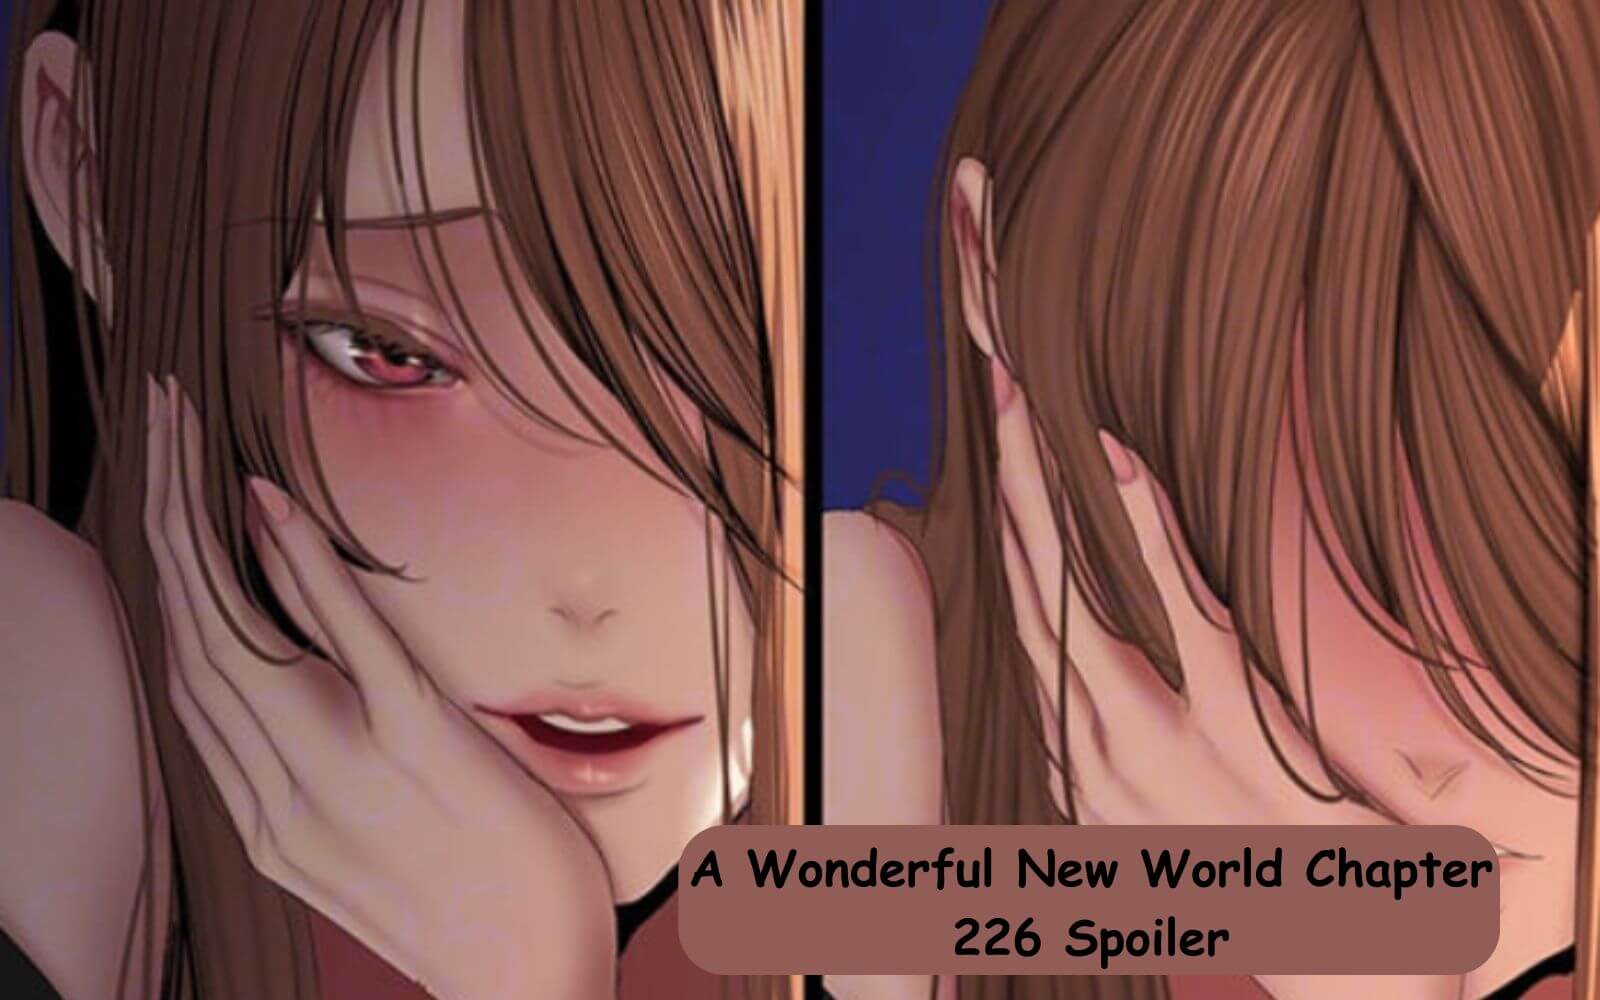 A Wonderful New World Chapter 226 Spoiler Revealed